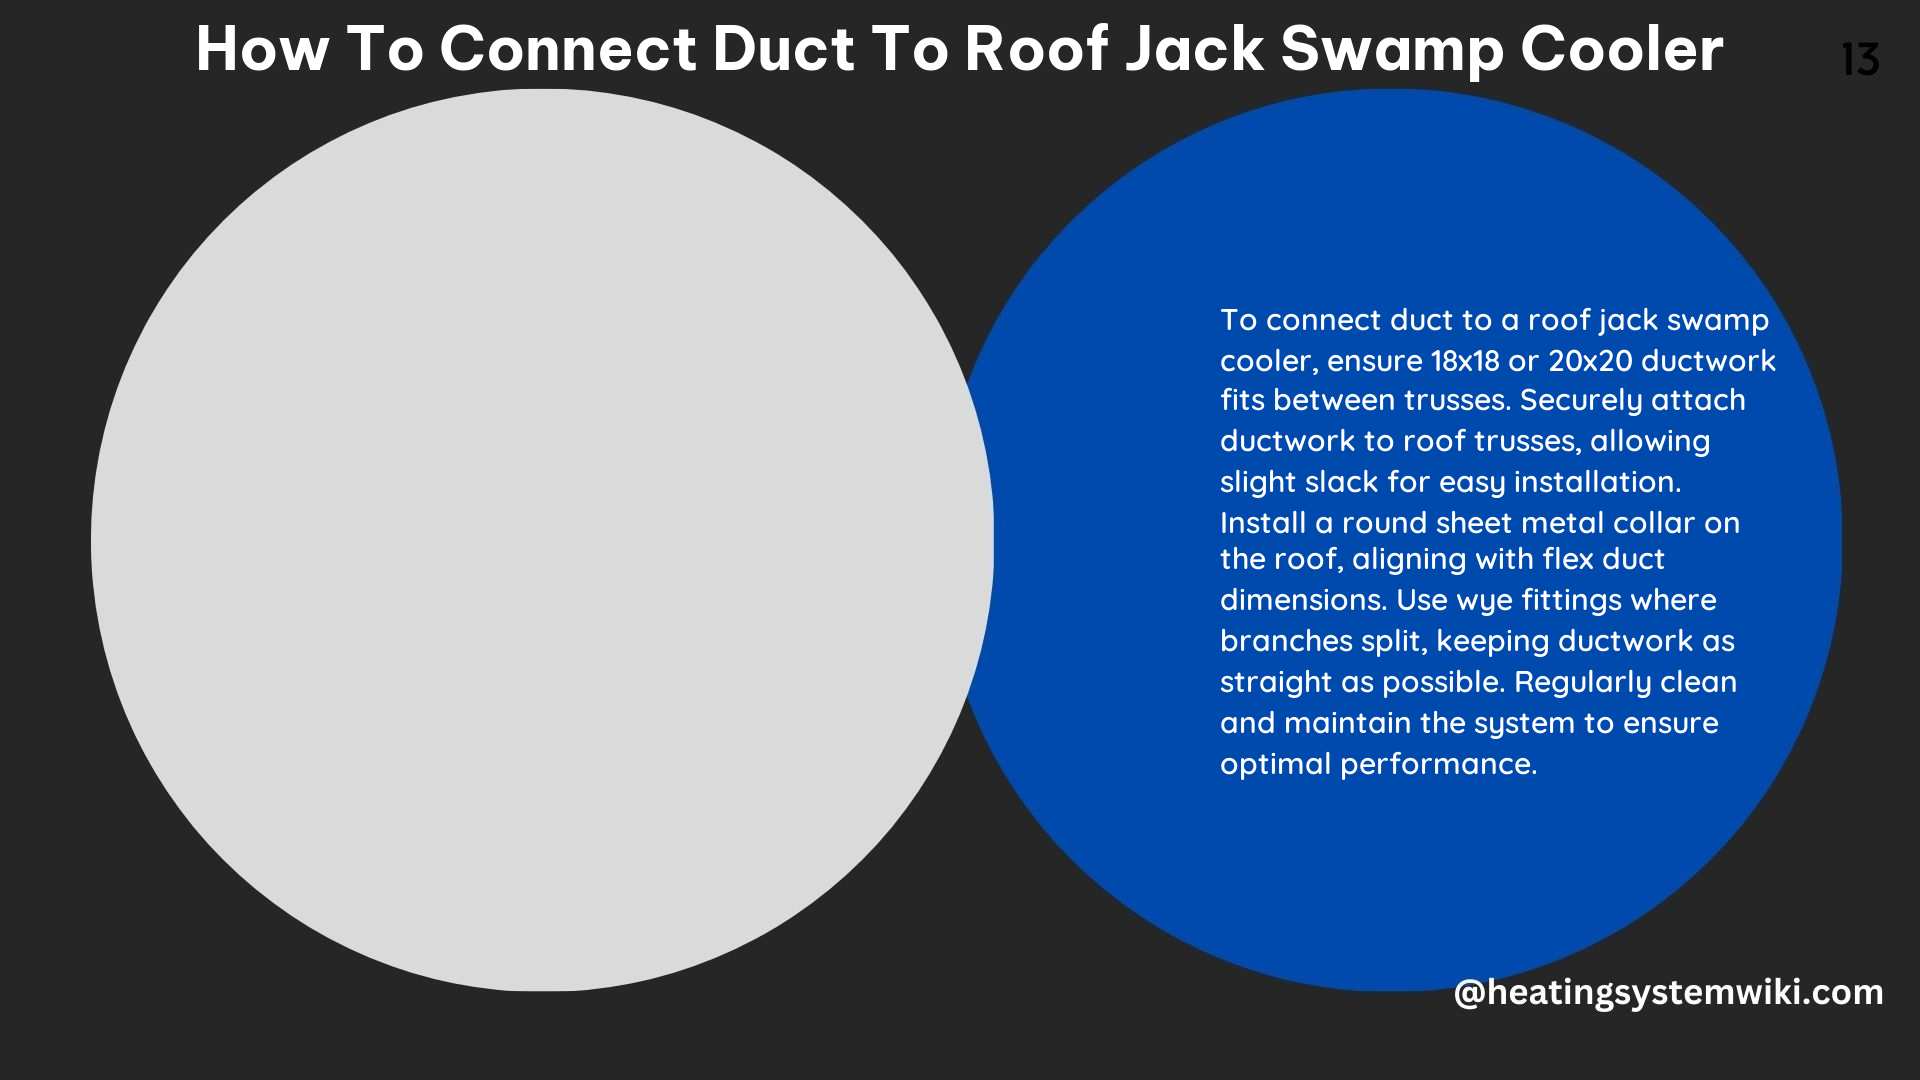 How to Connect Duct to Roof Jack Swamp Cooler